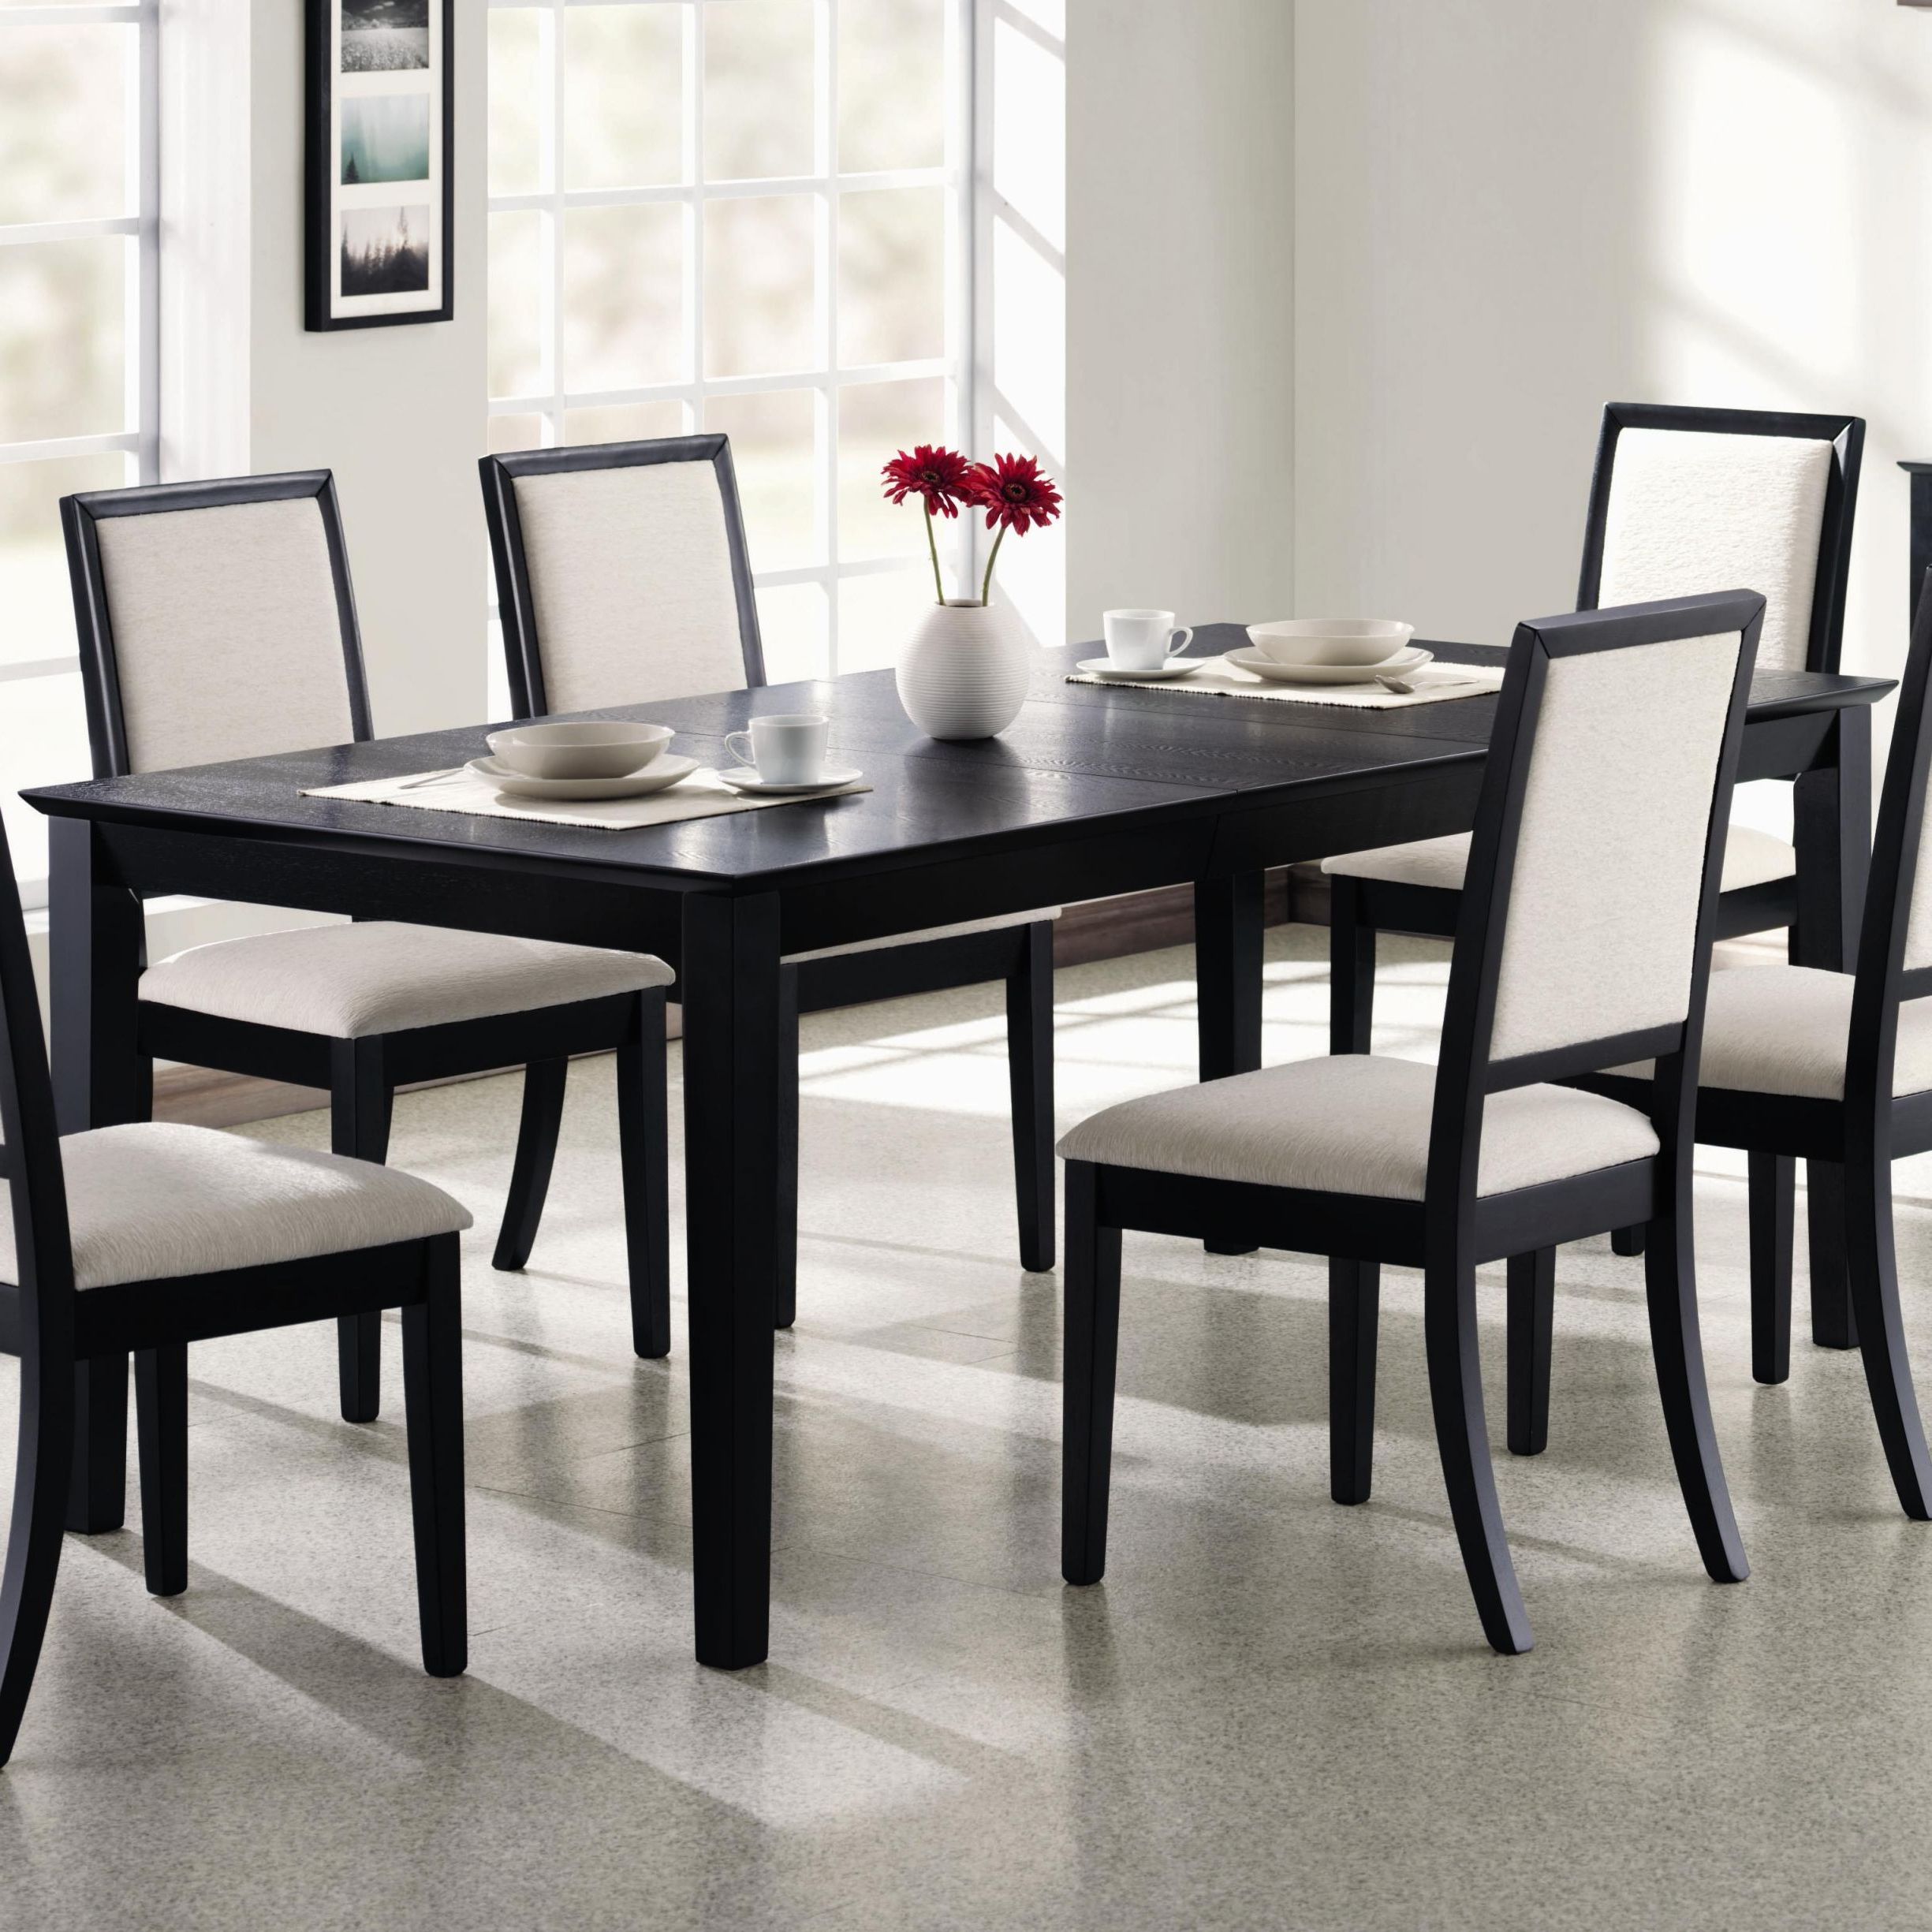 Coaster Contemporary 6 Seating Rectangular Casual Dining Tables With Regard To Well Known Elegant Casual Dining Room Table Set Inspiration – Awesome (View 3 of 25)